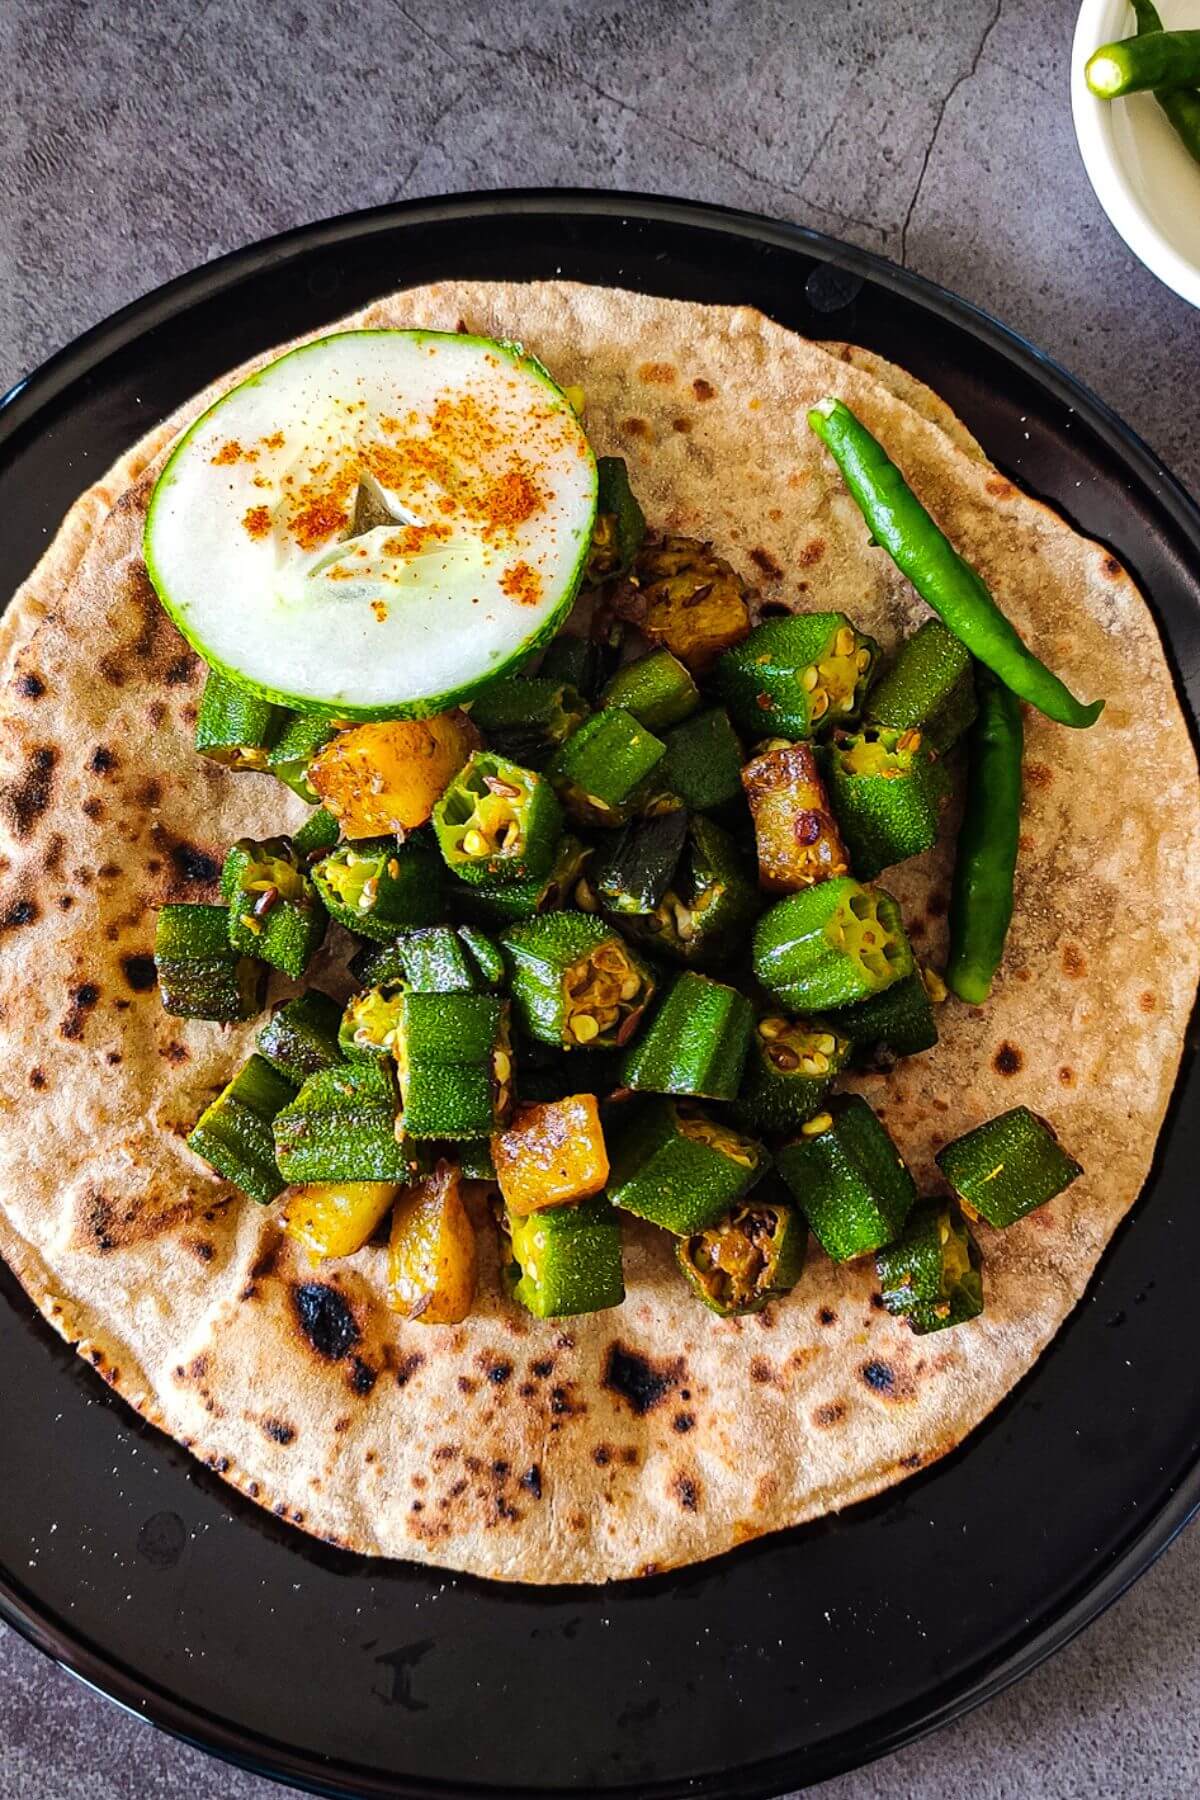 aloo bhindi sabzi served over roti with a slice of cucumber and green chilies.